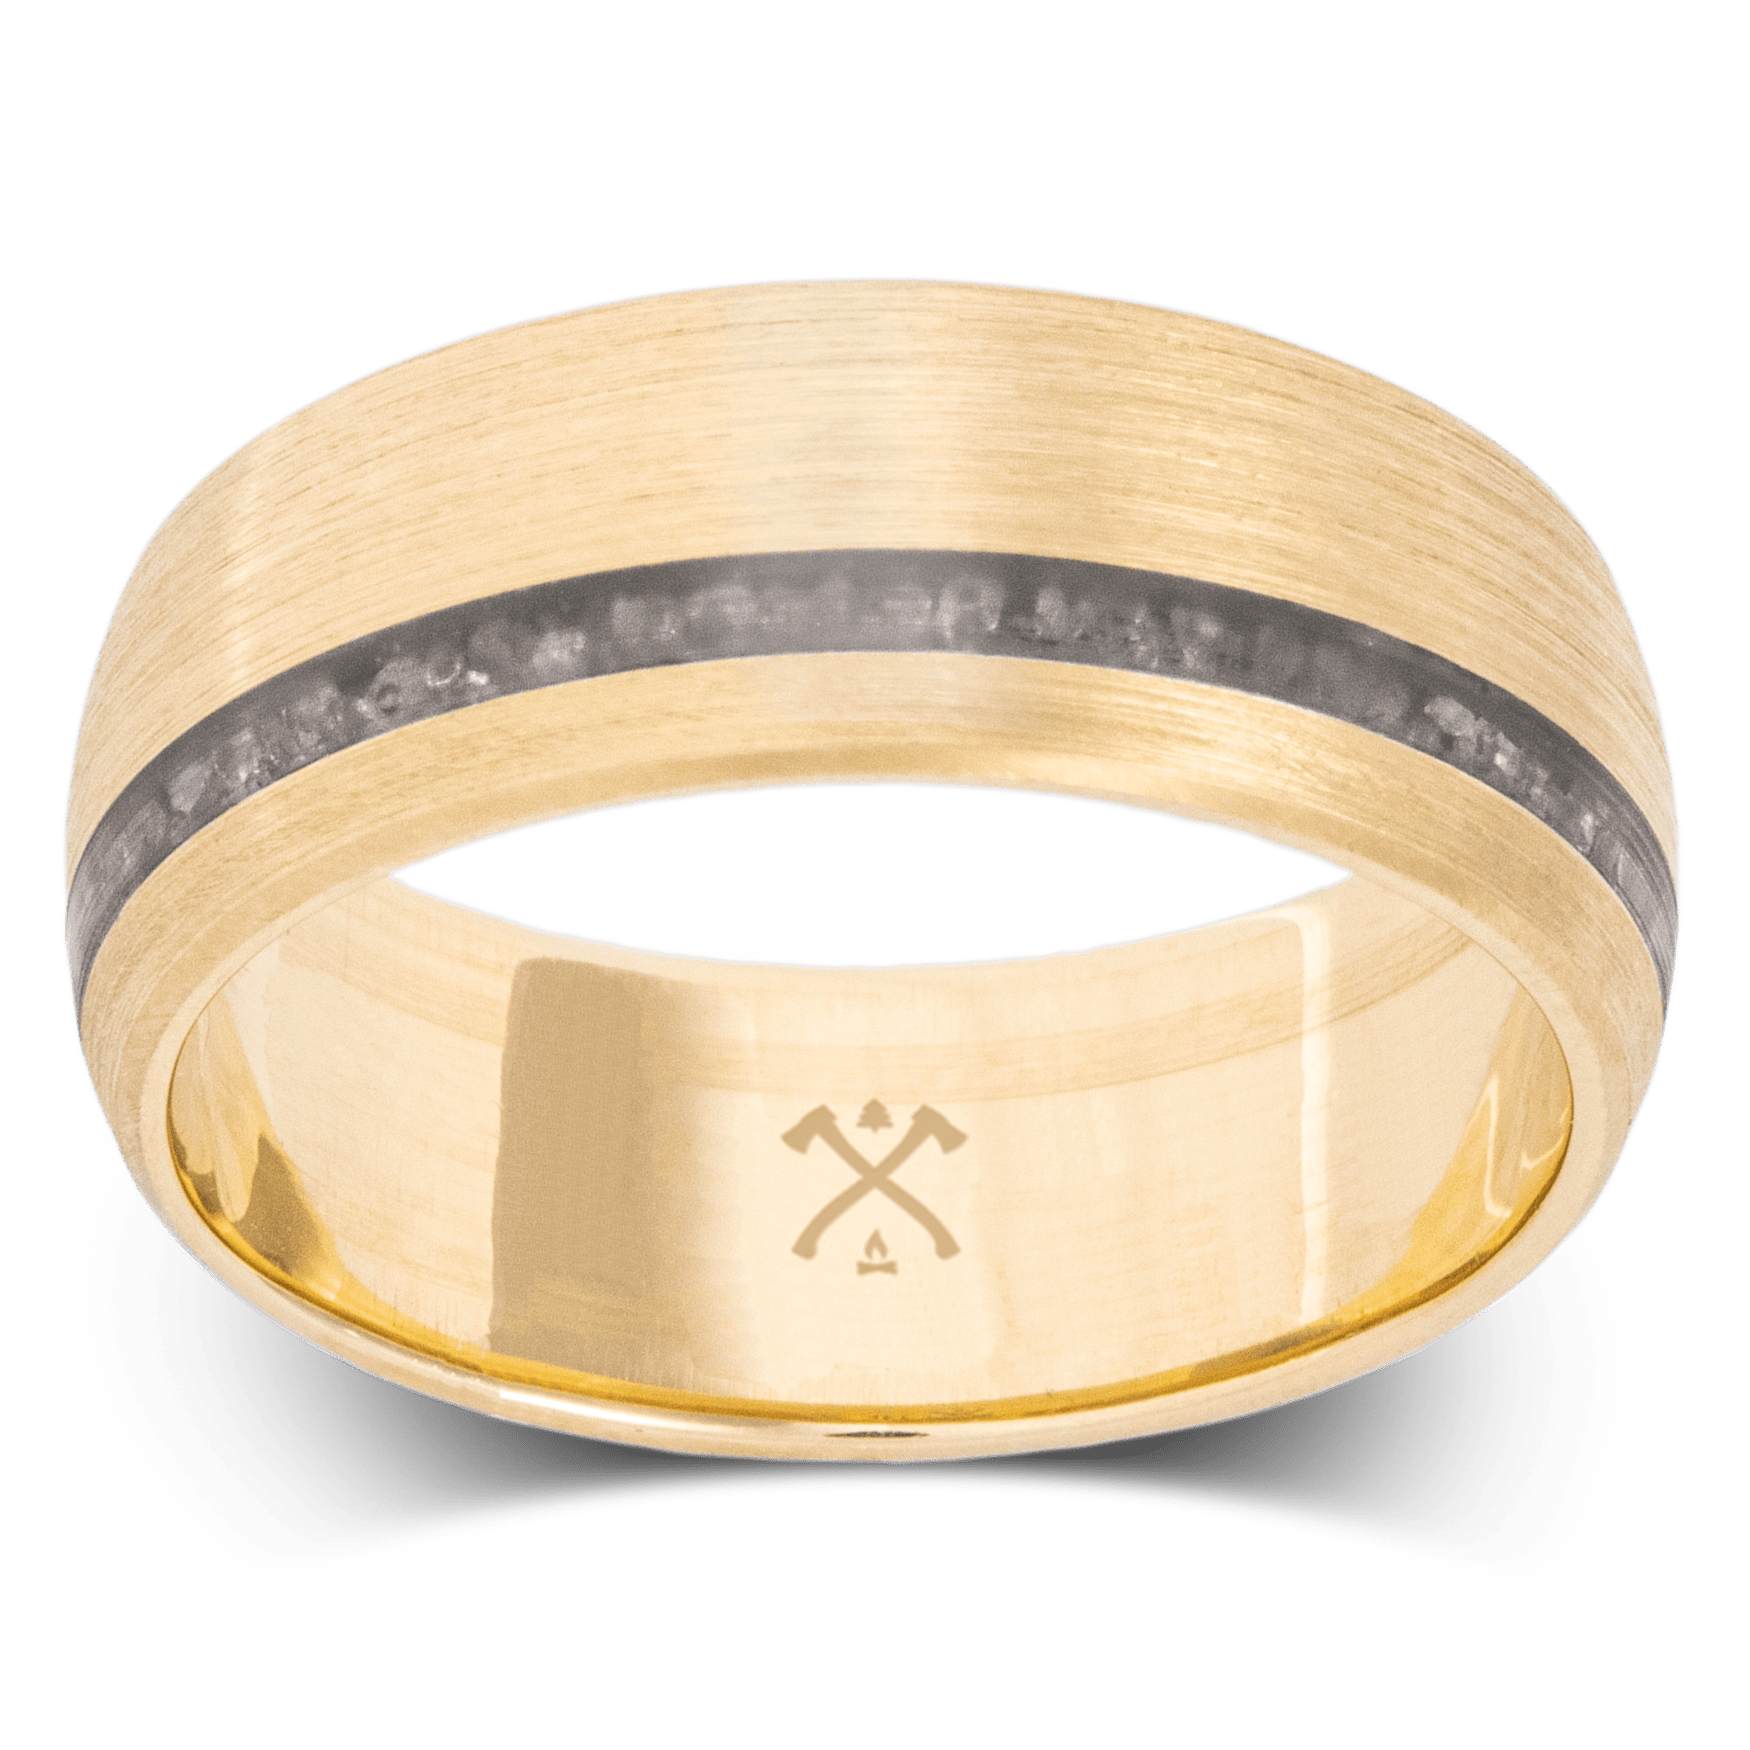 The Zeus - Men's Wedding Rings - Manly Bands